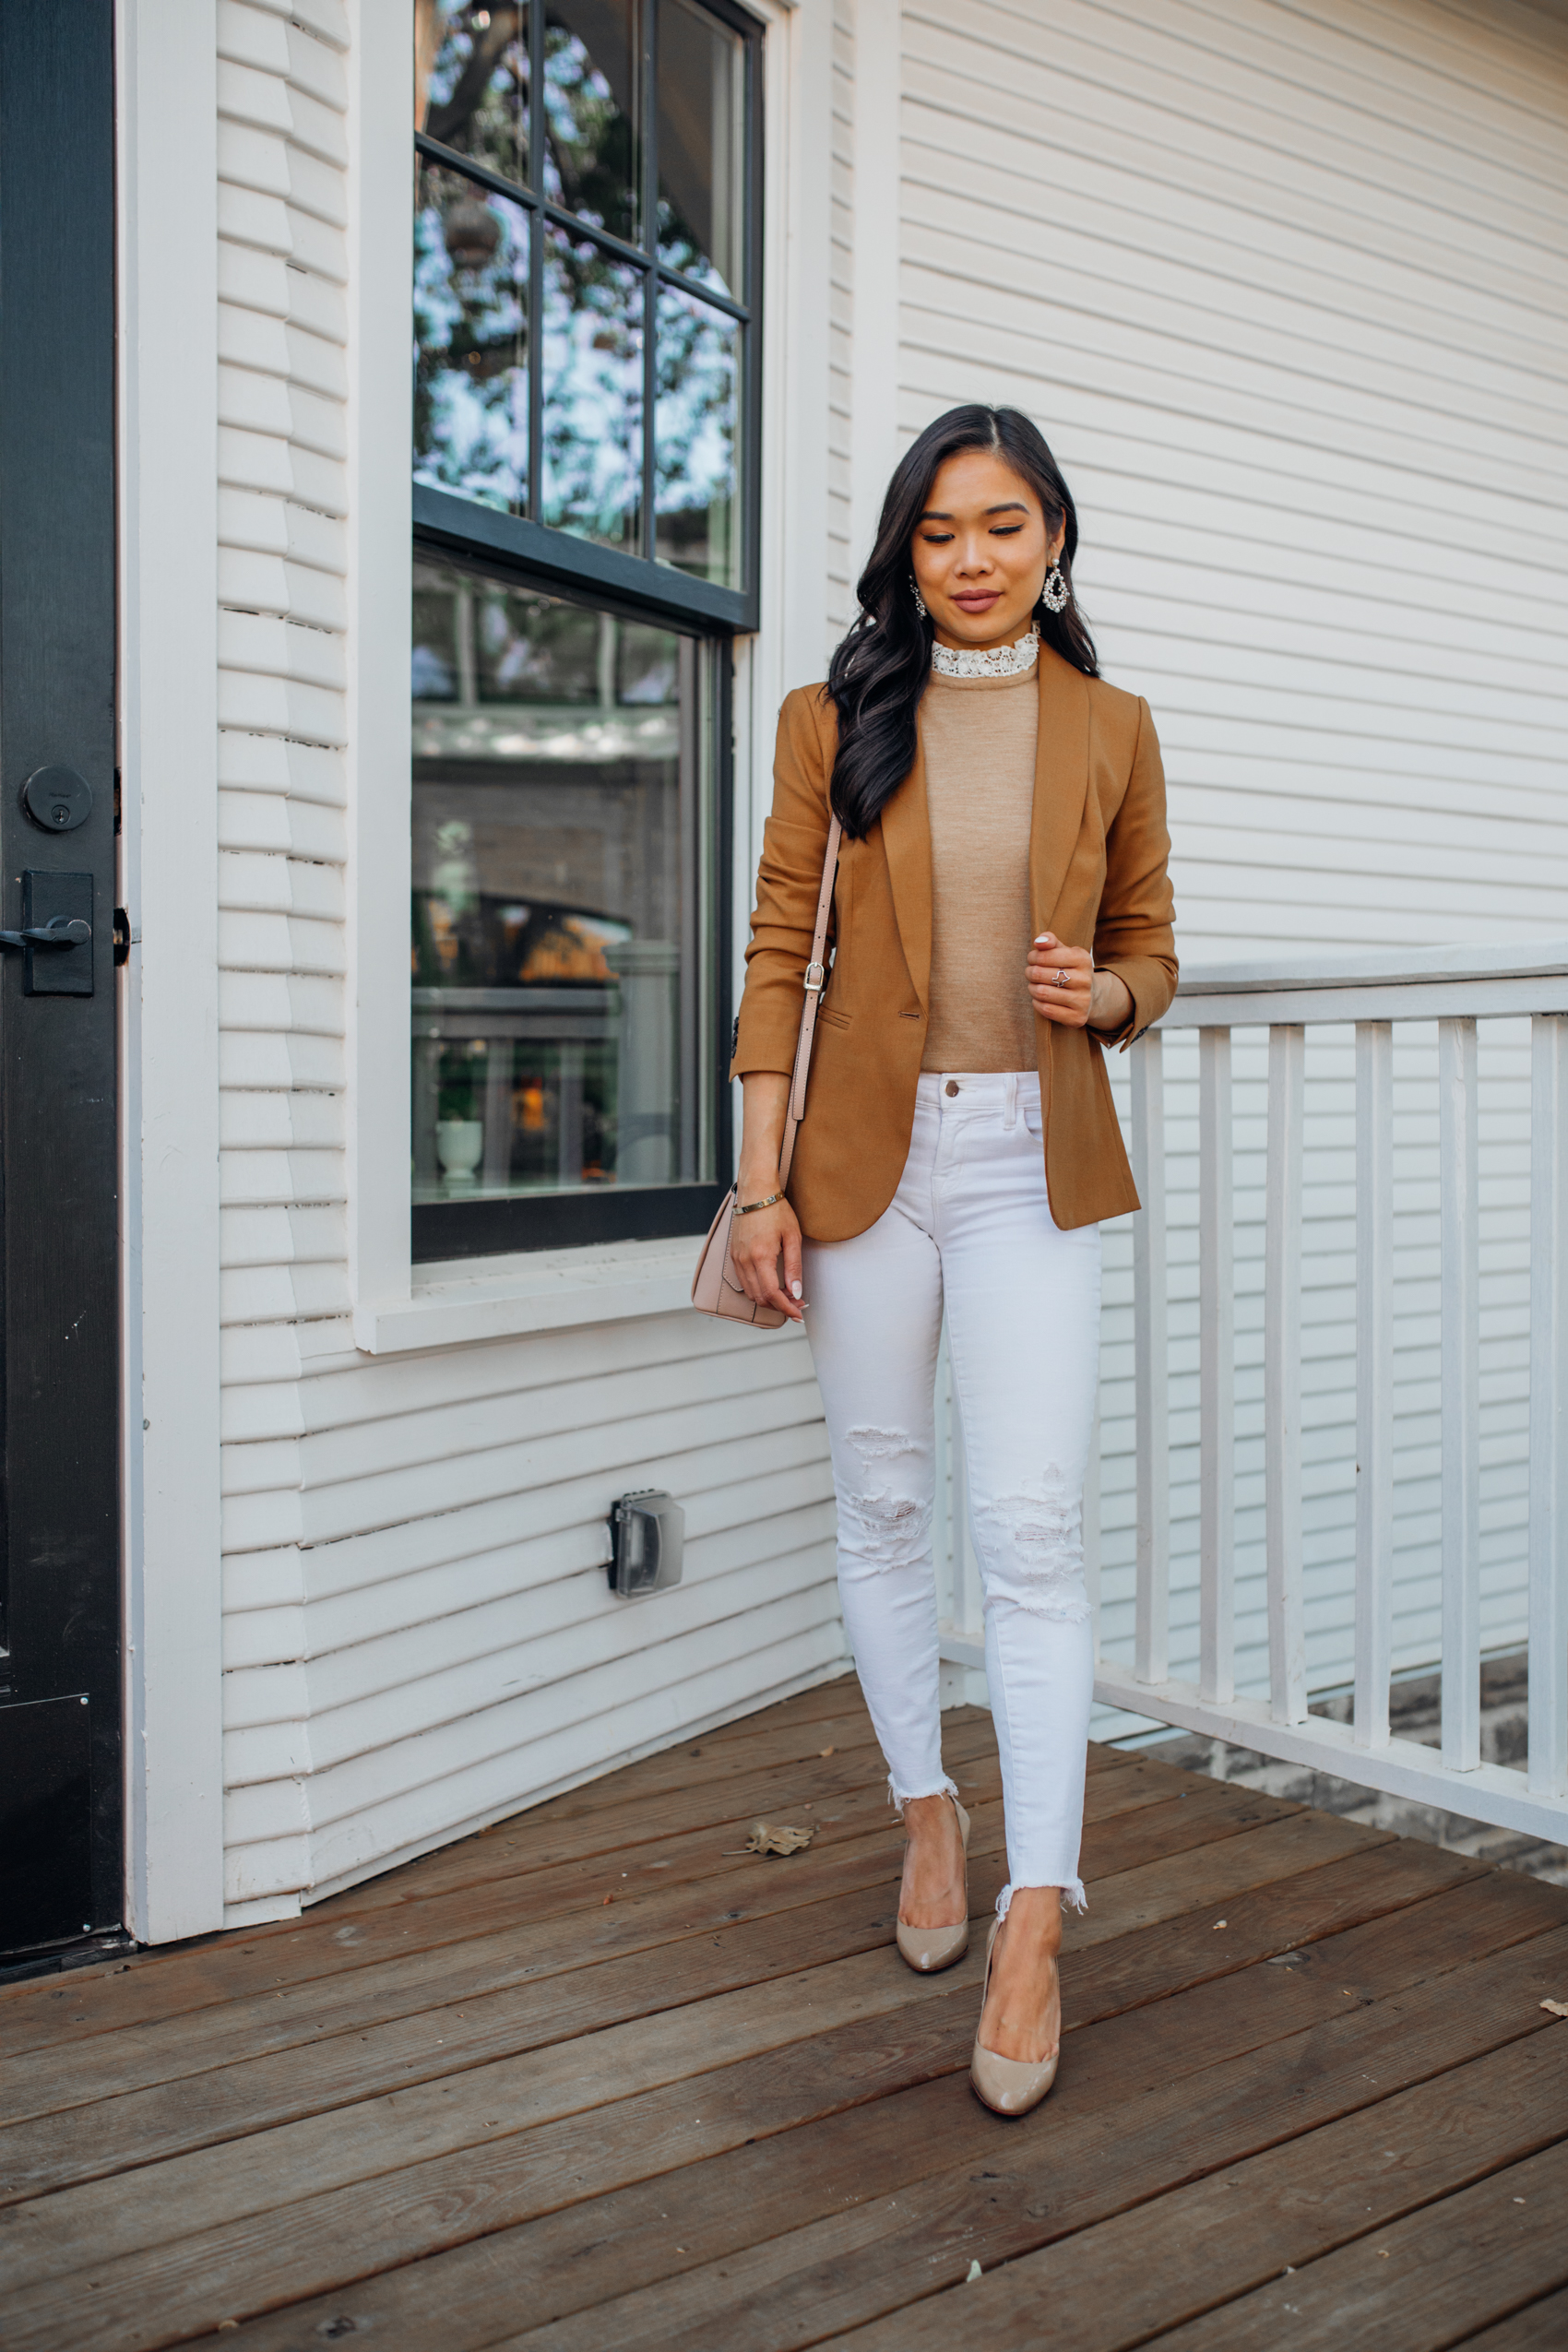 Petite blogger Hoang-Kim wears a brown blazer outfit for fall with JCrew Parke Blazer, Tippi sweater with lace collar detail, JBrand Distressed jeans and Christian Louboutin pumps in Bishop Arts Dallas